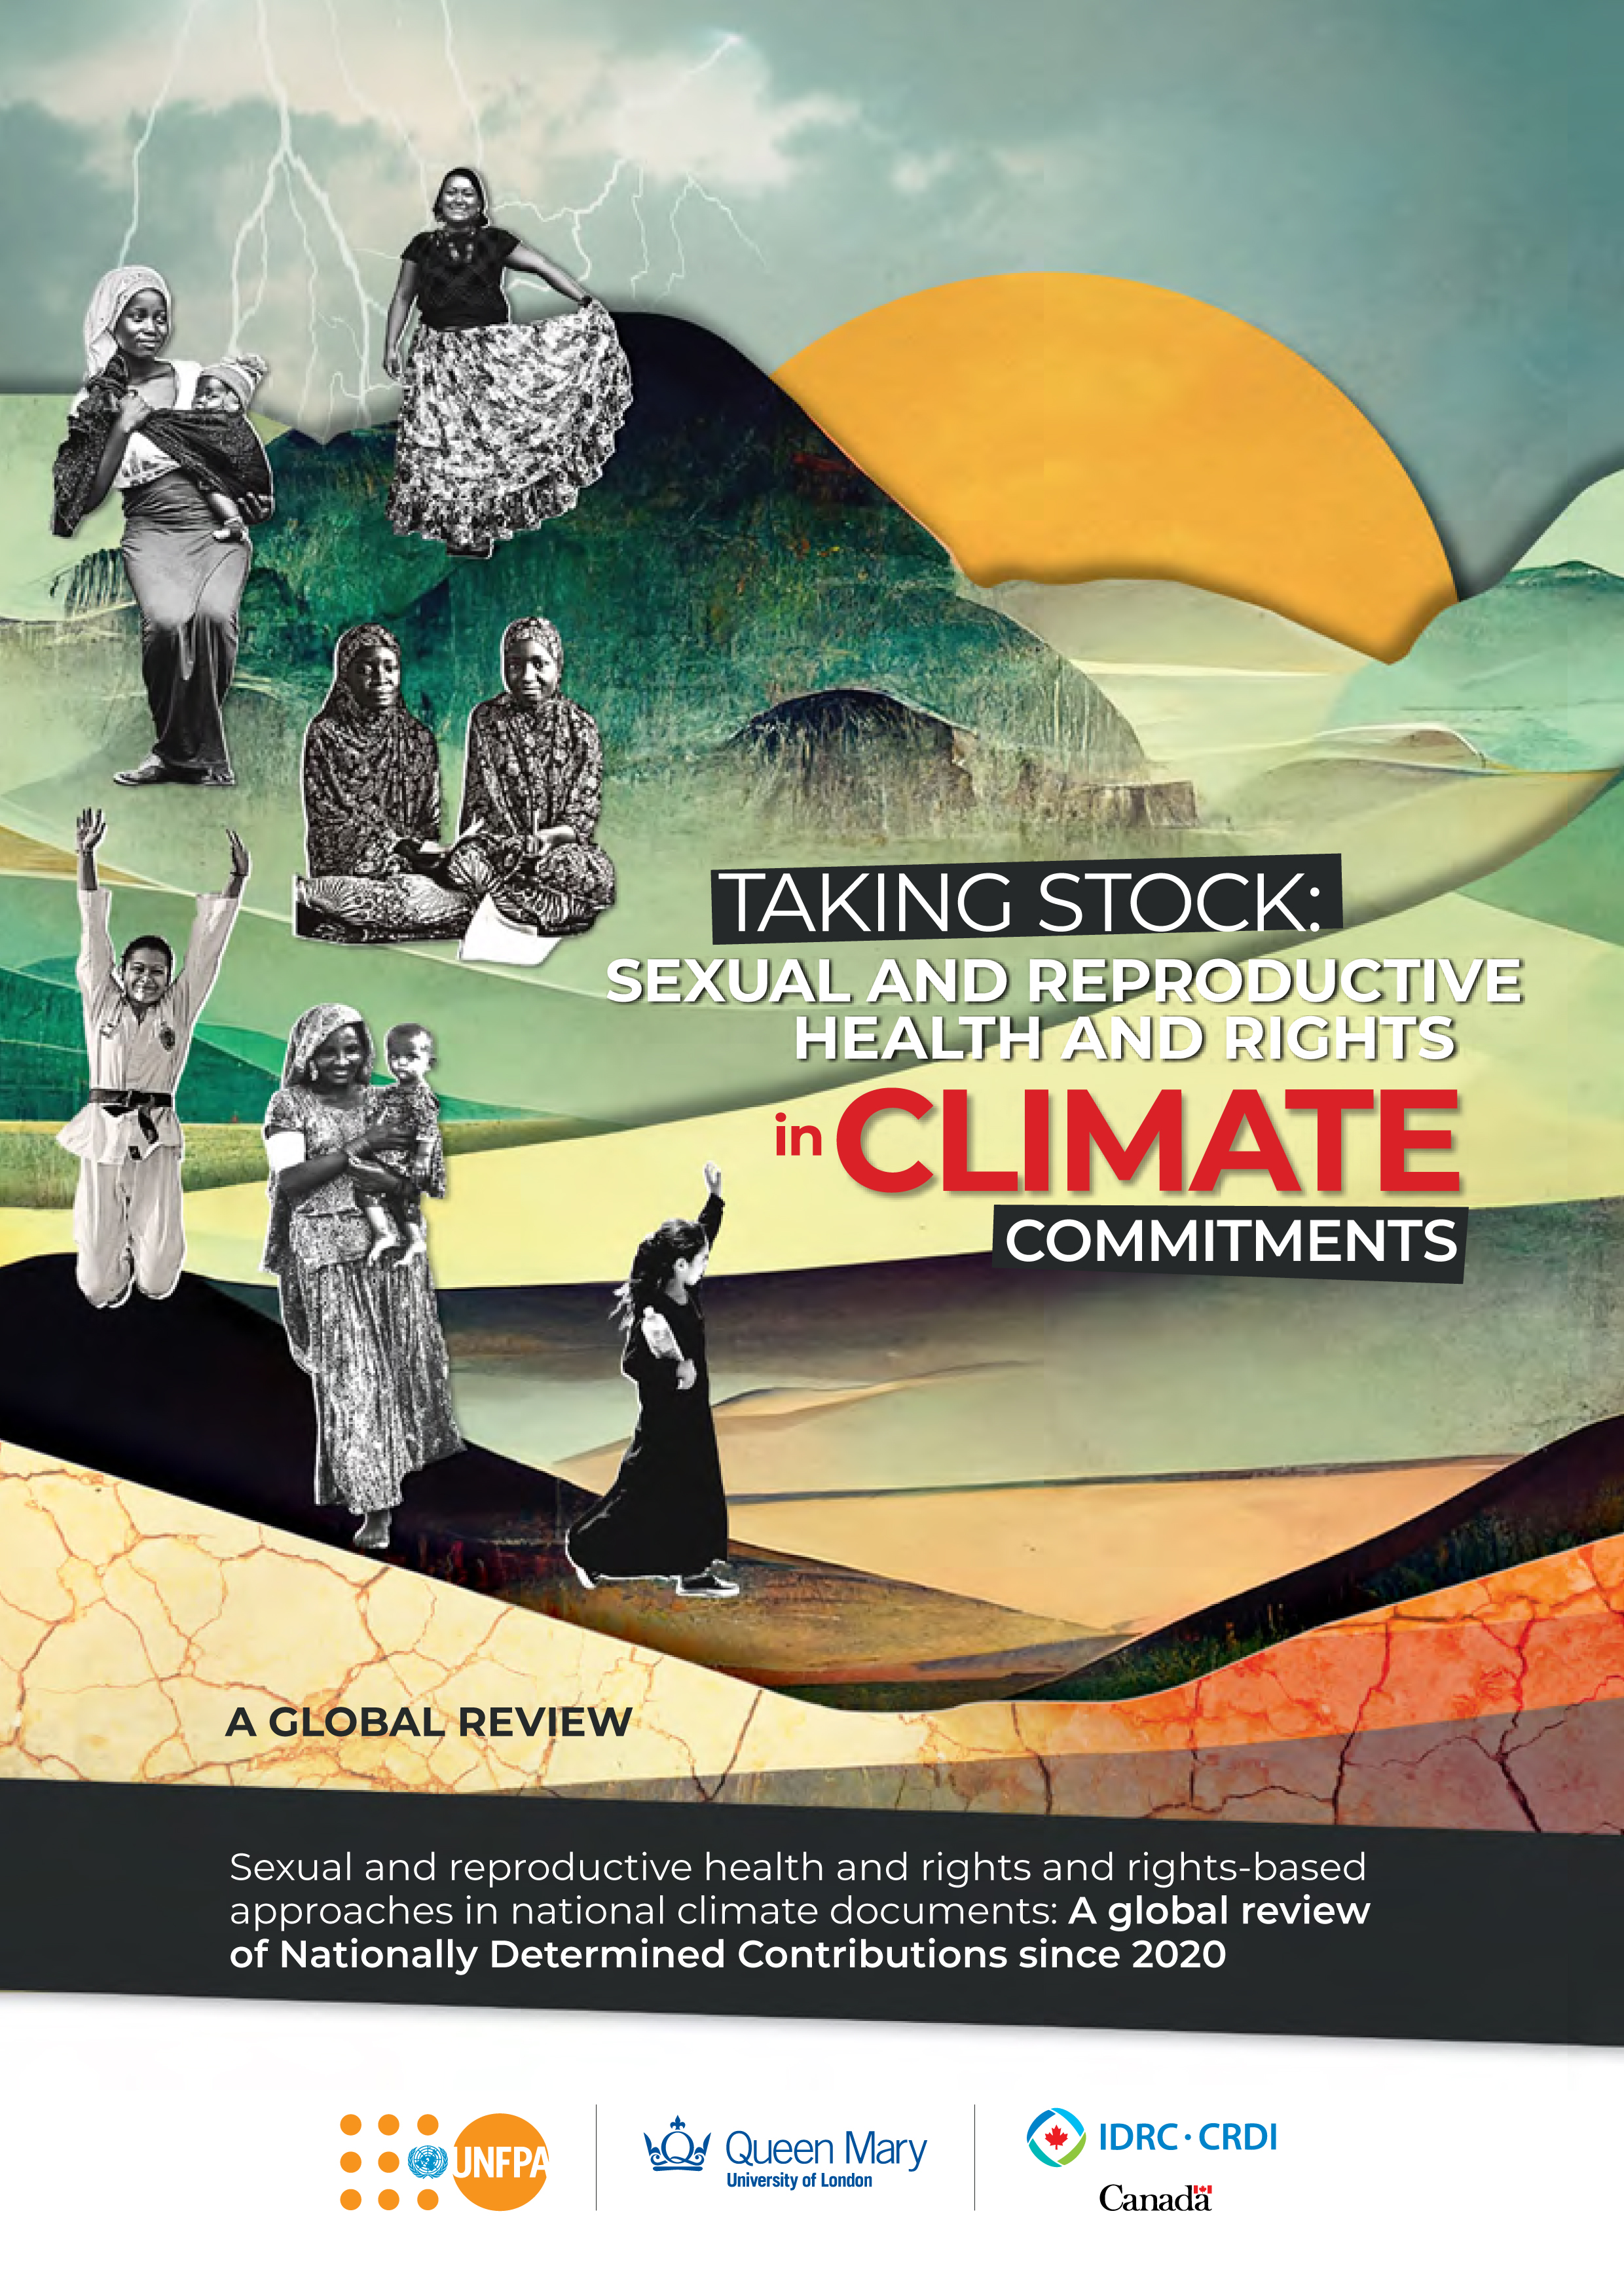 image of Taking Stock: Sexual and Reproductive Health and Rights in Climate Commitments